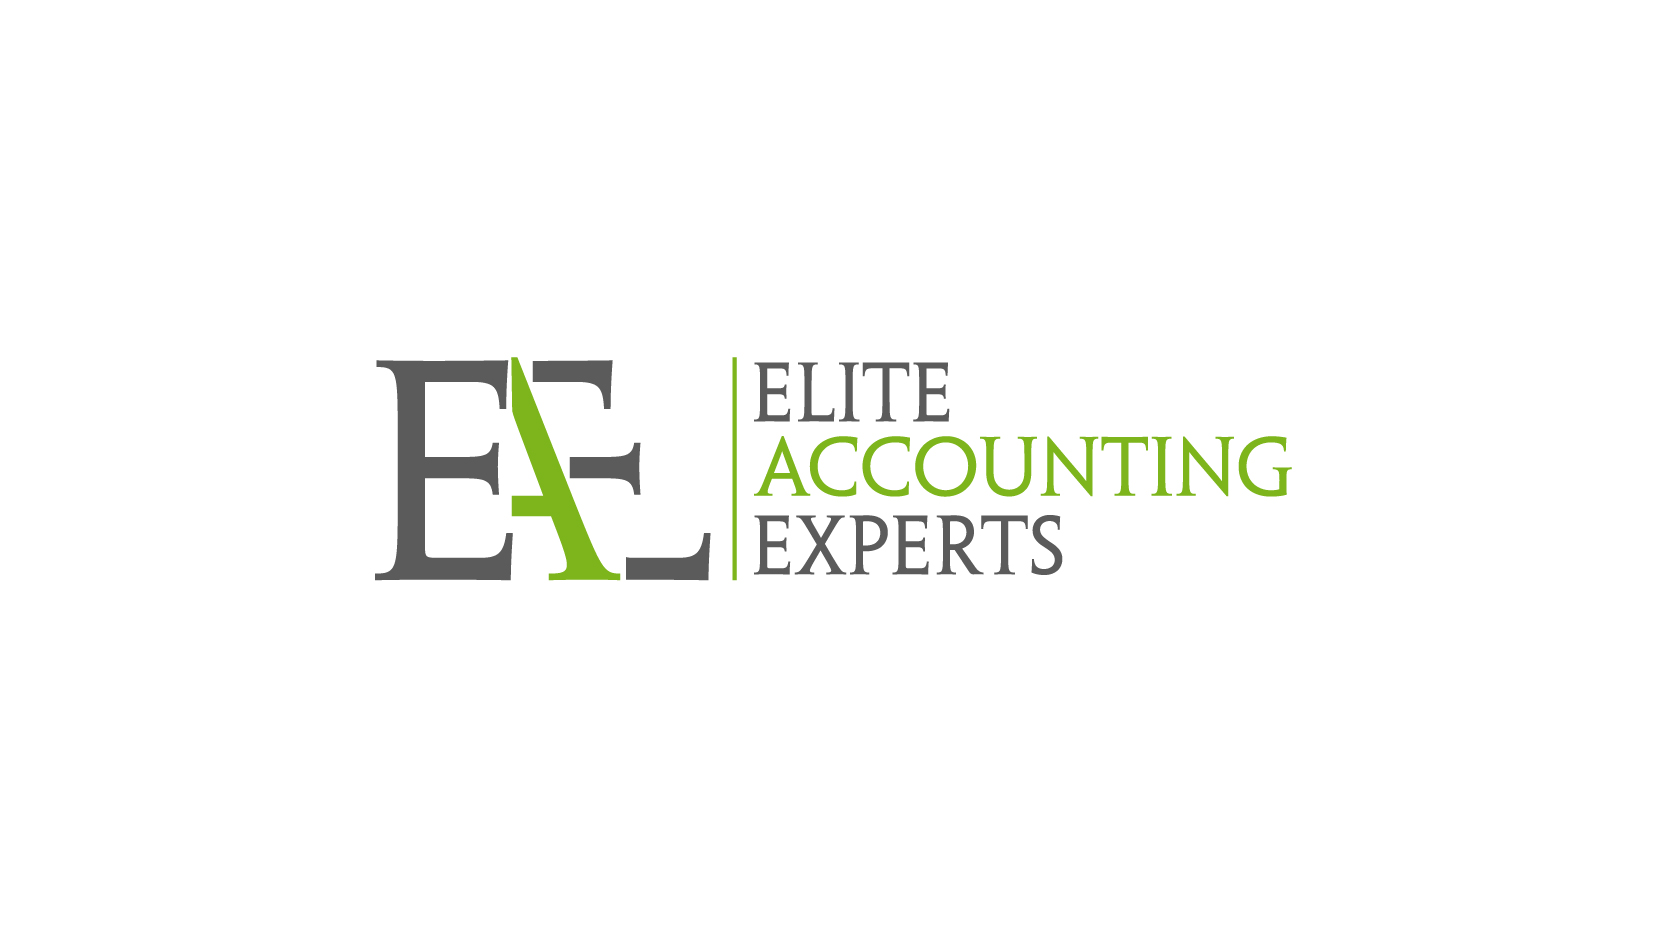 Elite Accounting Experts